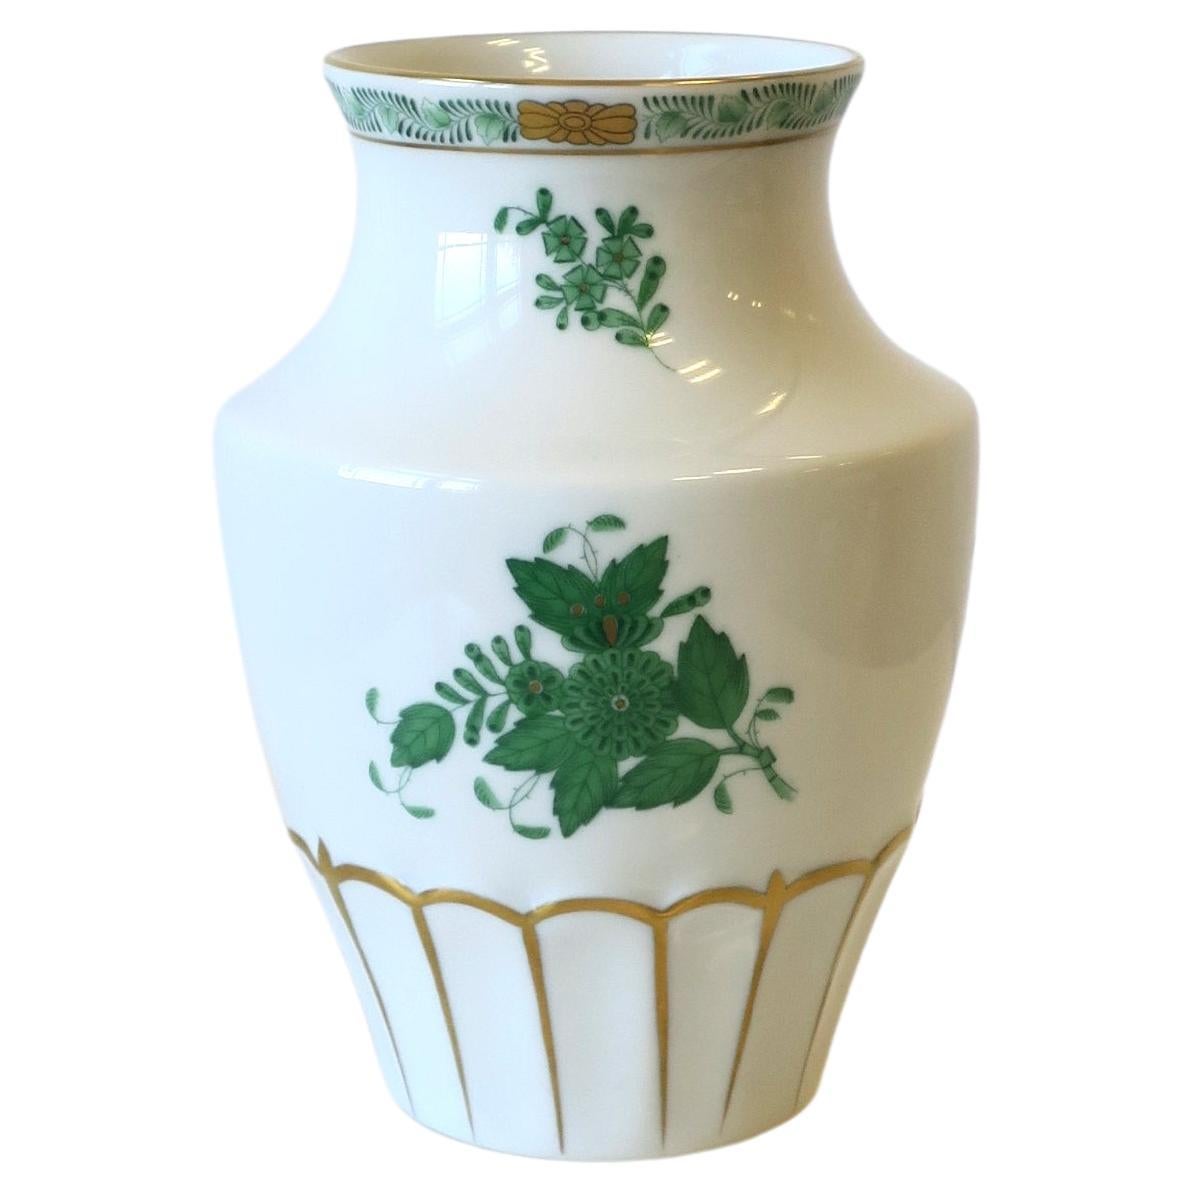 Herend White Porcelain Vase with Green and Gold Design